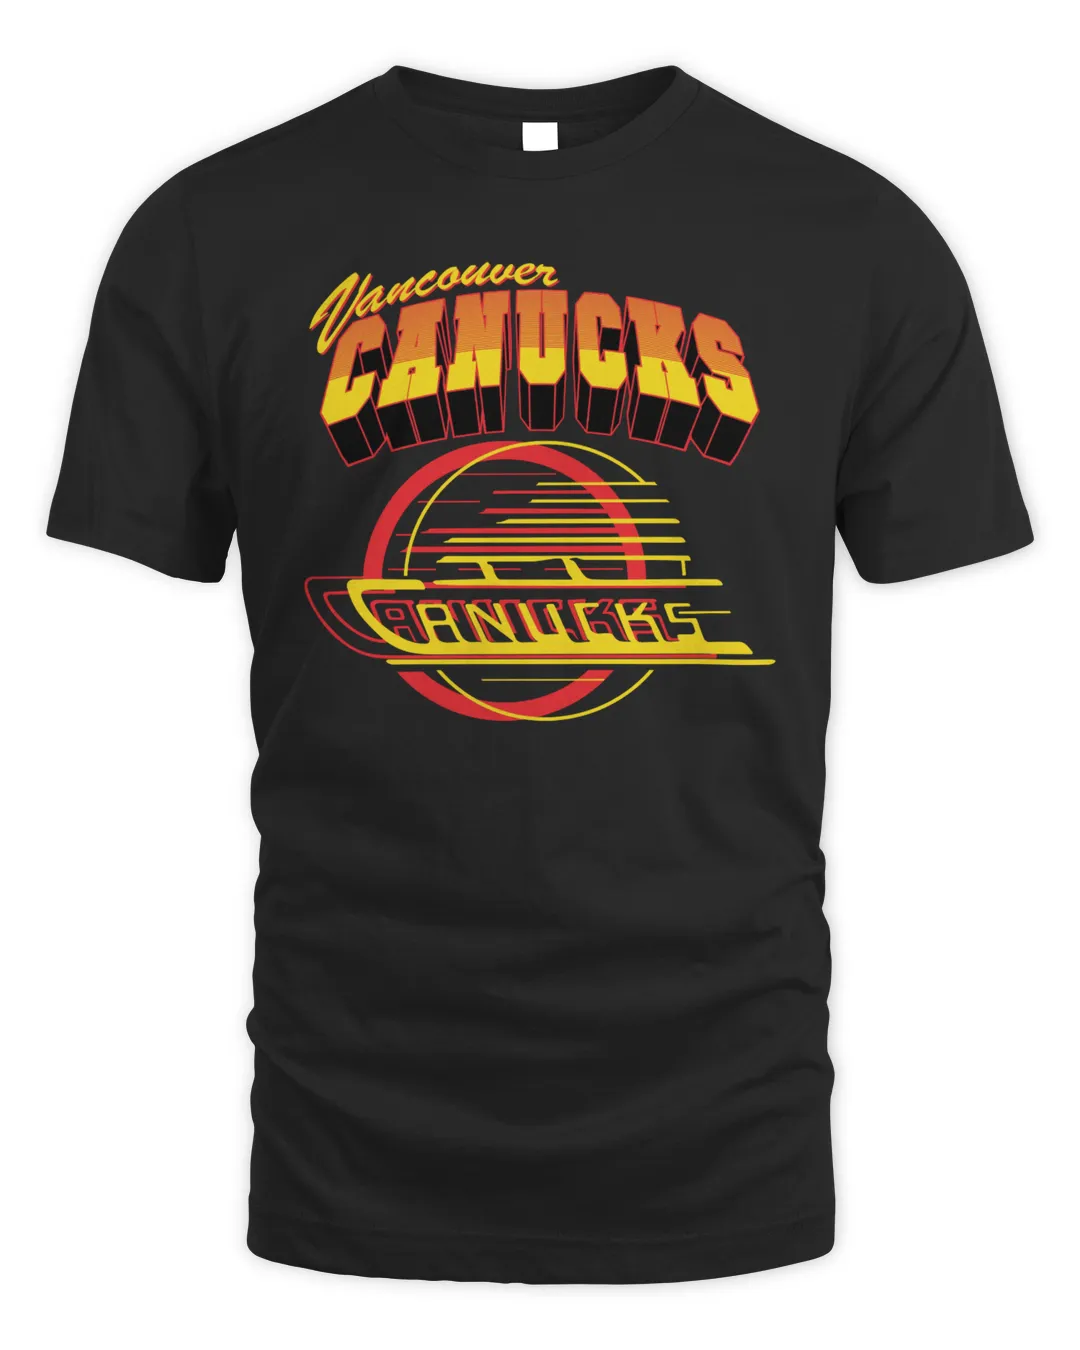 Vancouver Canucks x In House Vortex Skate Tee